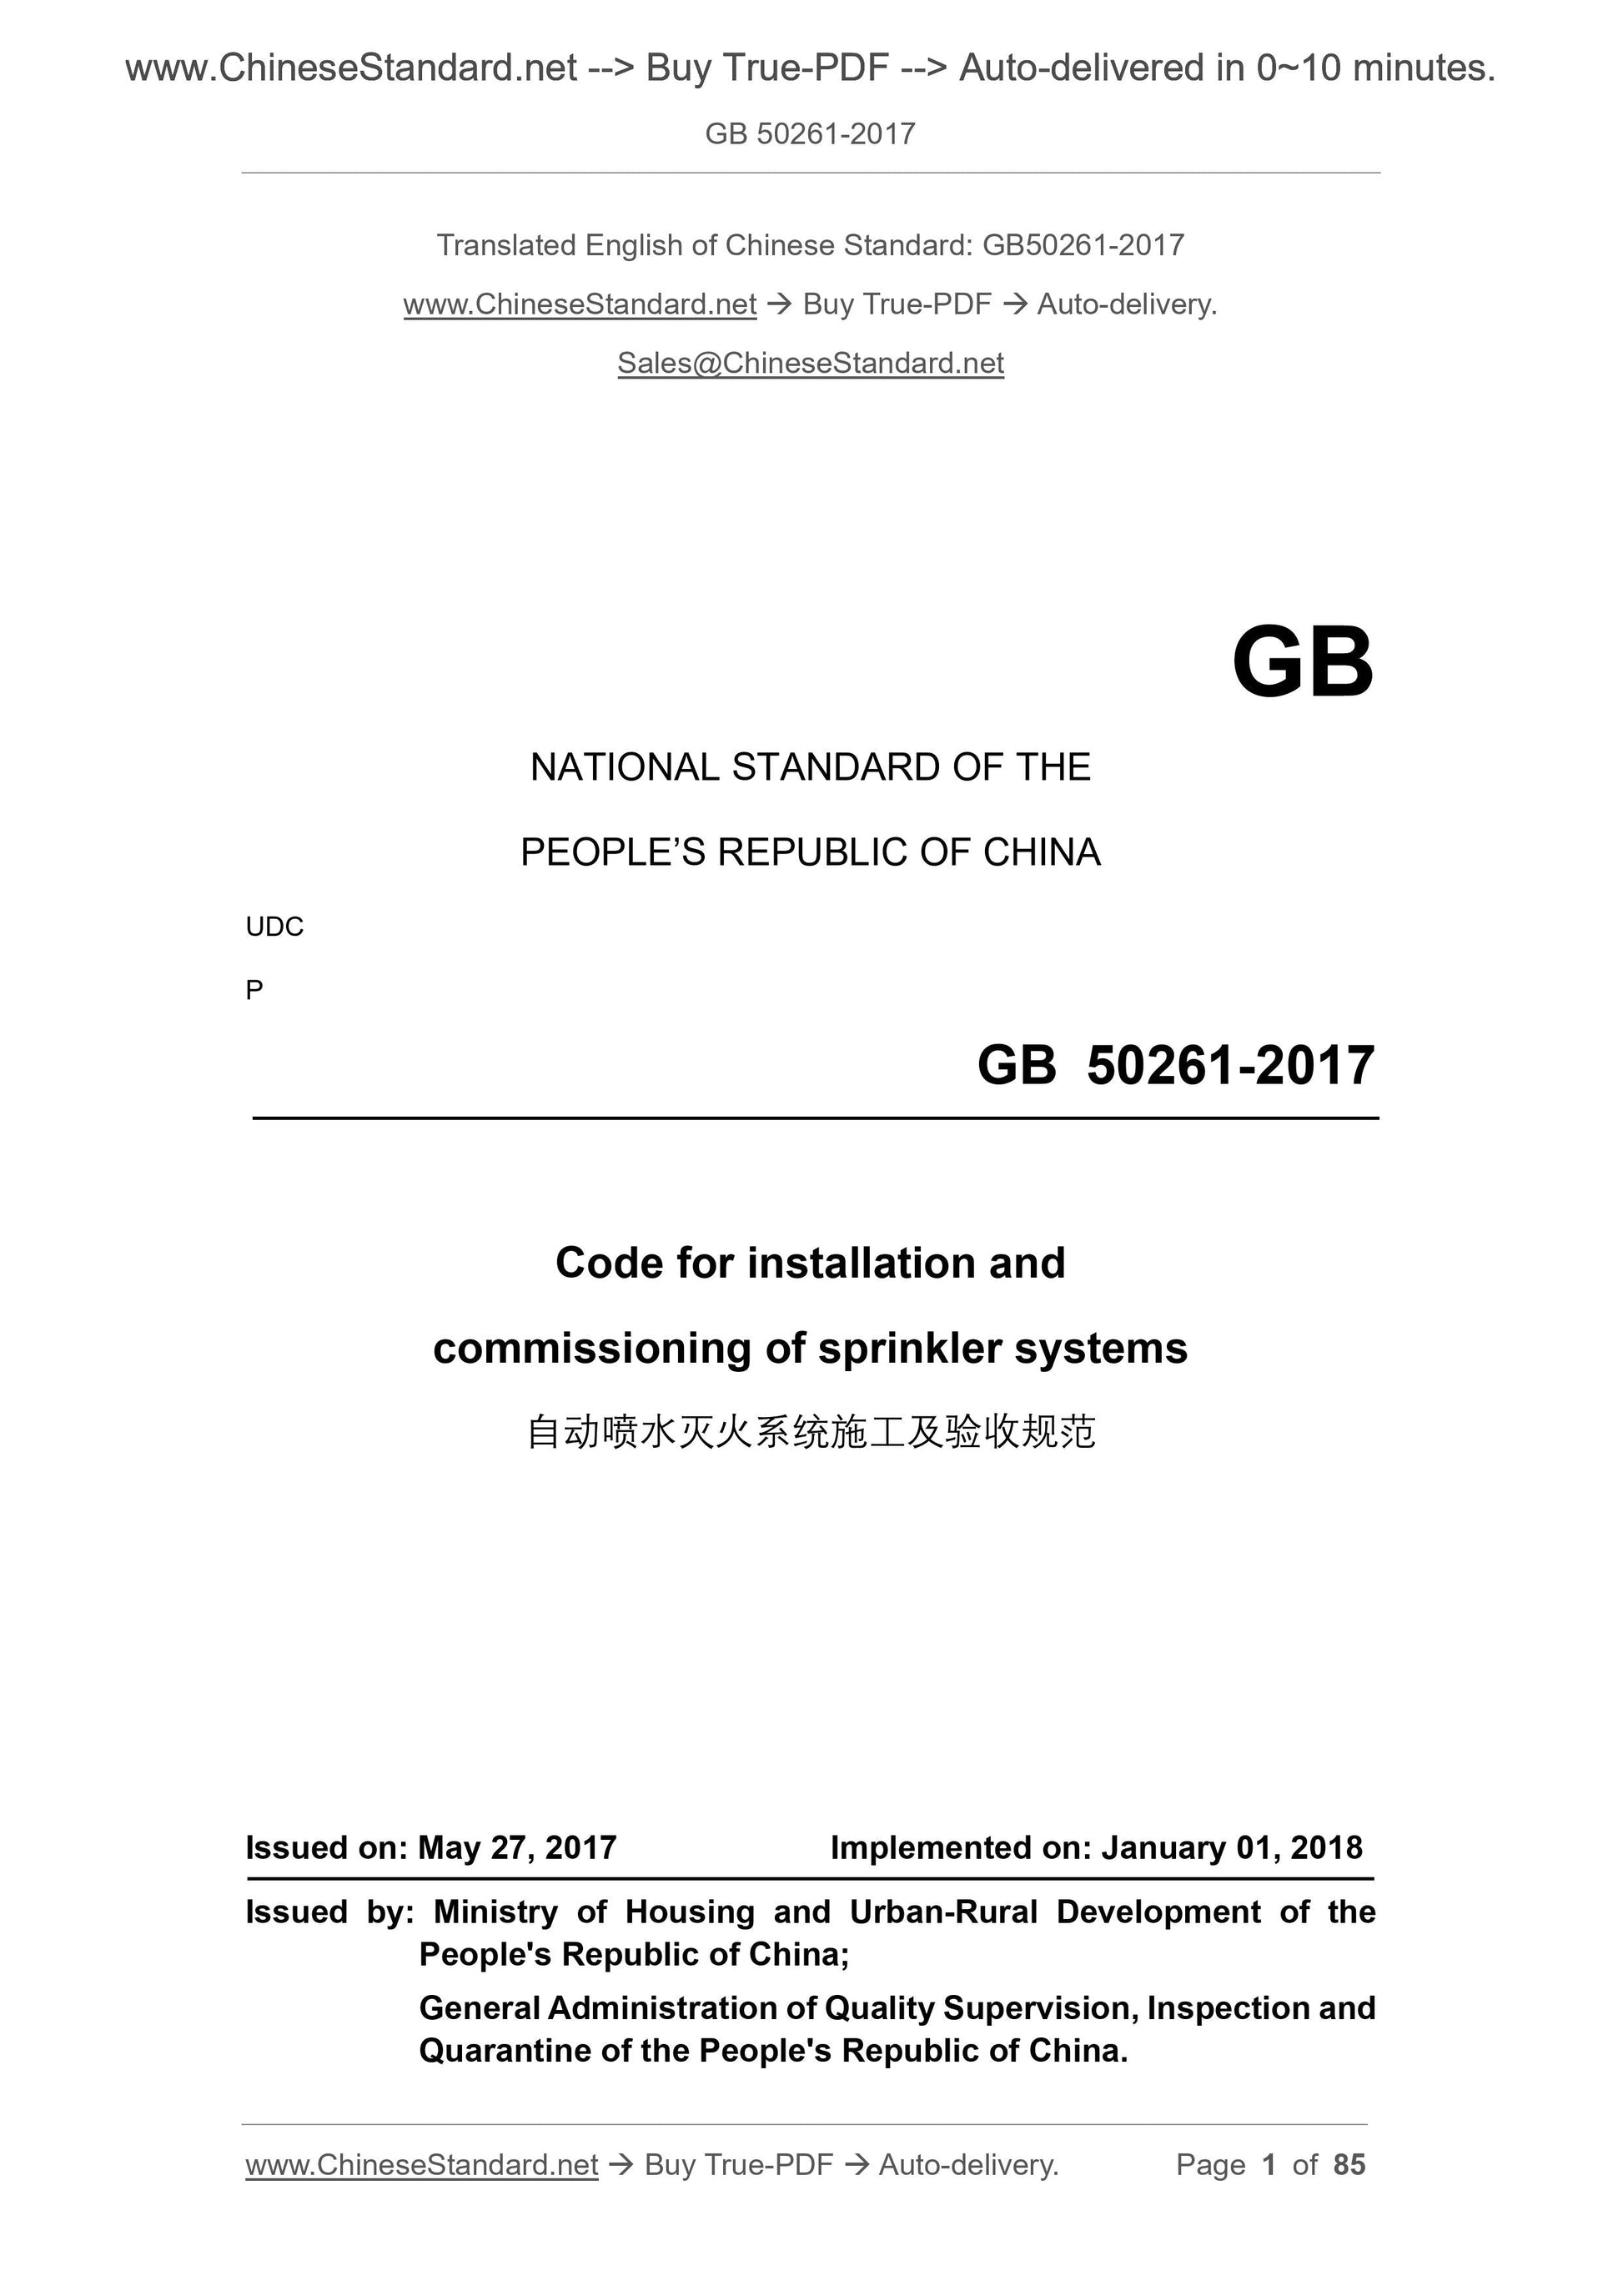 GB 50261-2017 Page 1